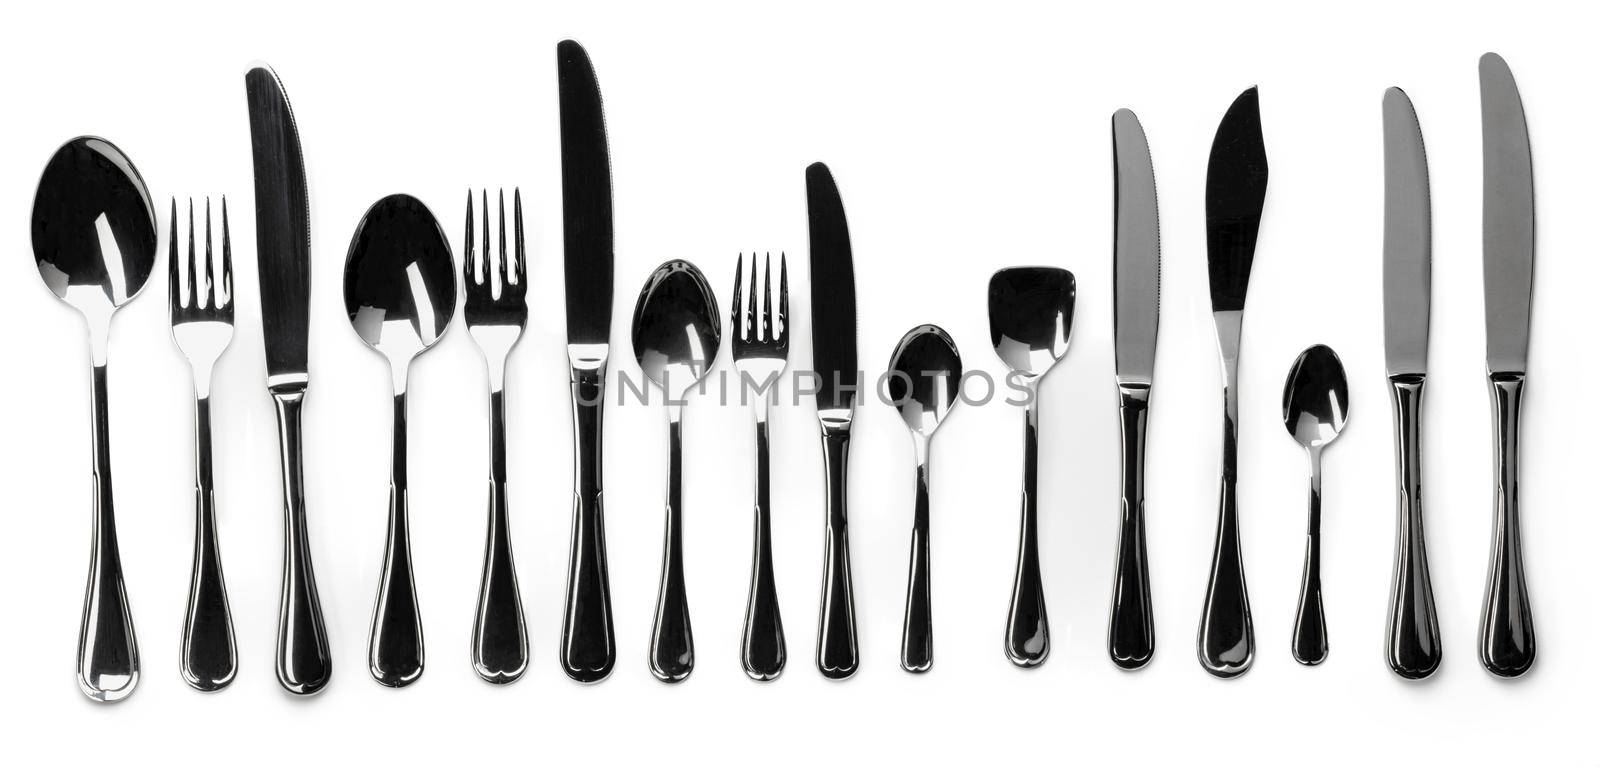 Set of stainless steel cutlery isolated on white by Fabrikasimf